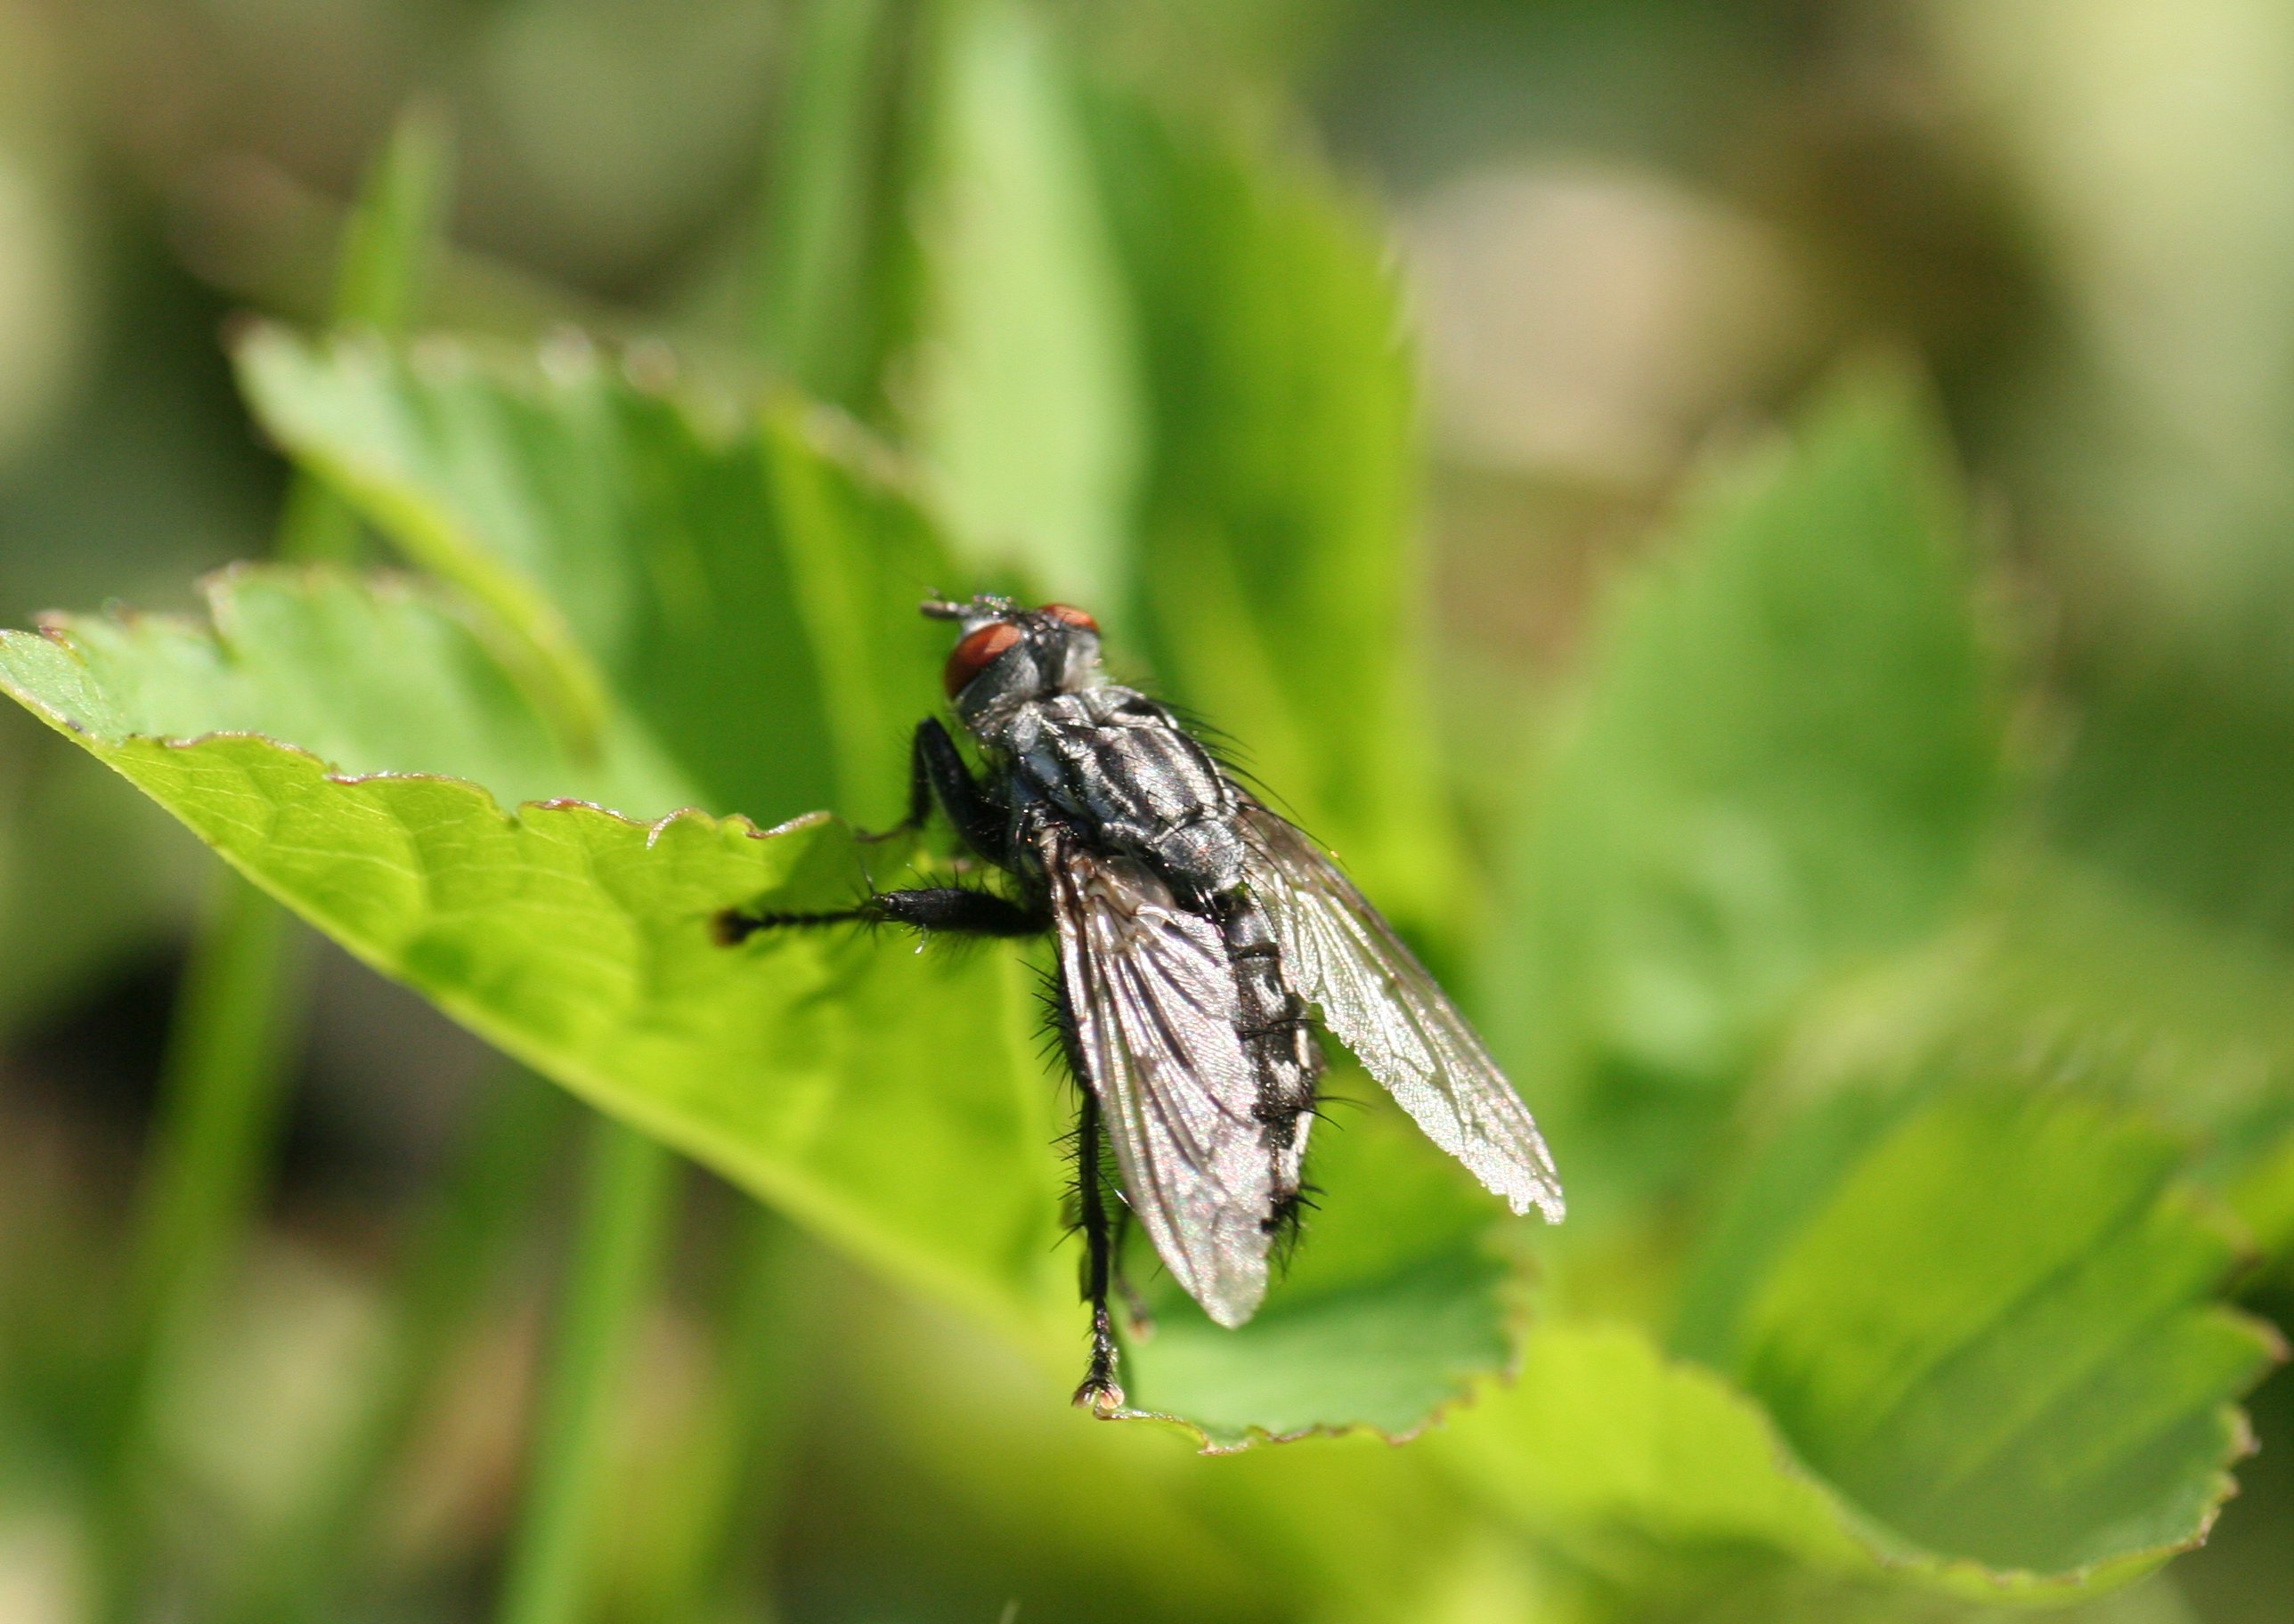 File:Rear view of a fly sat on a leaf.jpg - Wikimedia Commons